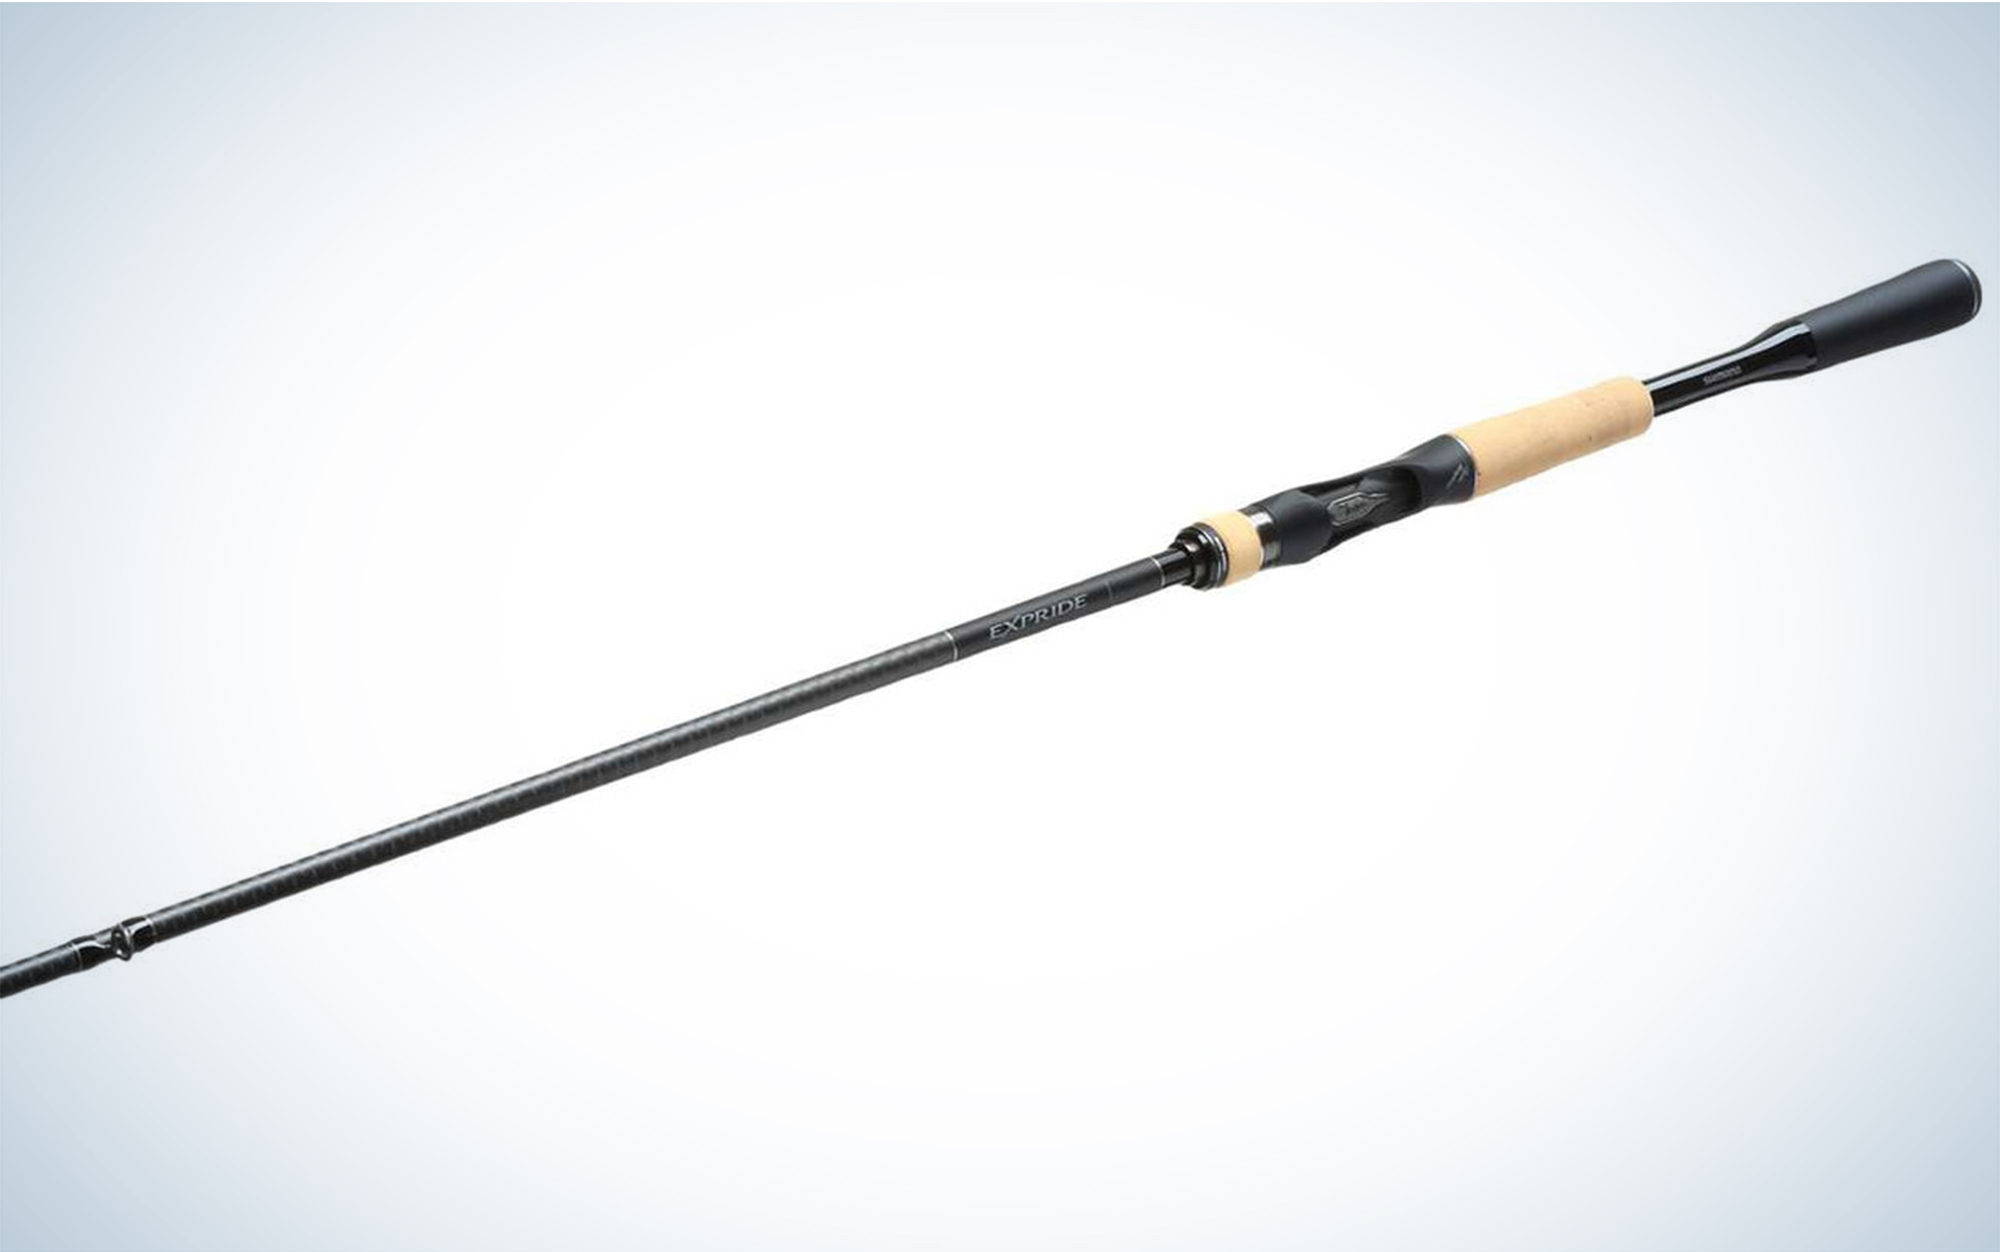 The Best Overall: Shimano Expride EXCMH2MHB is the best overall baitcasting rod for bass.